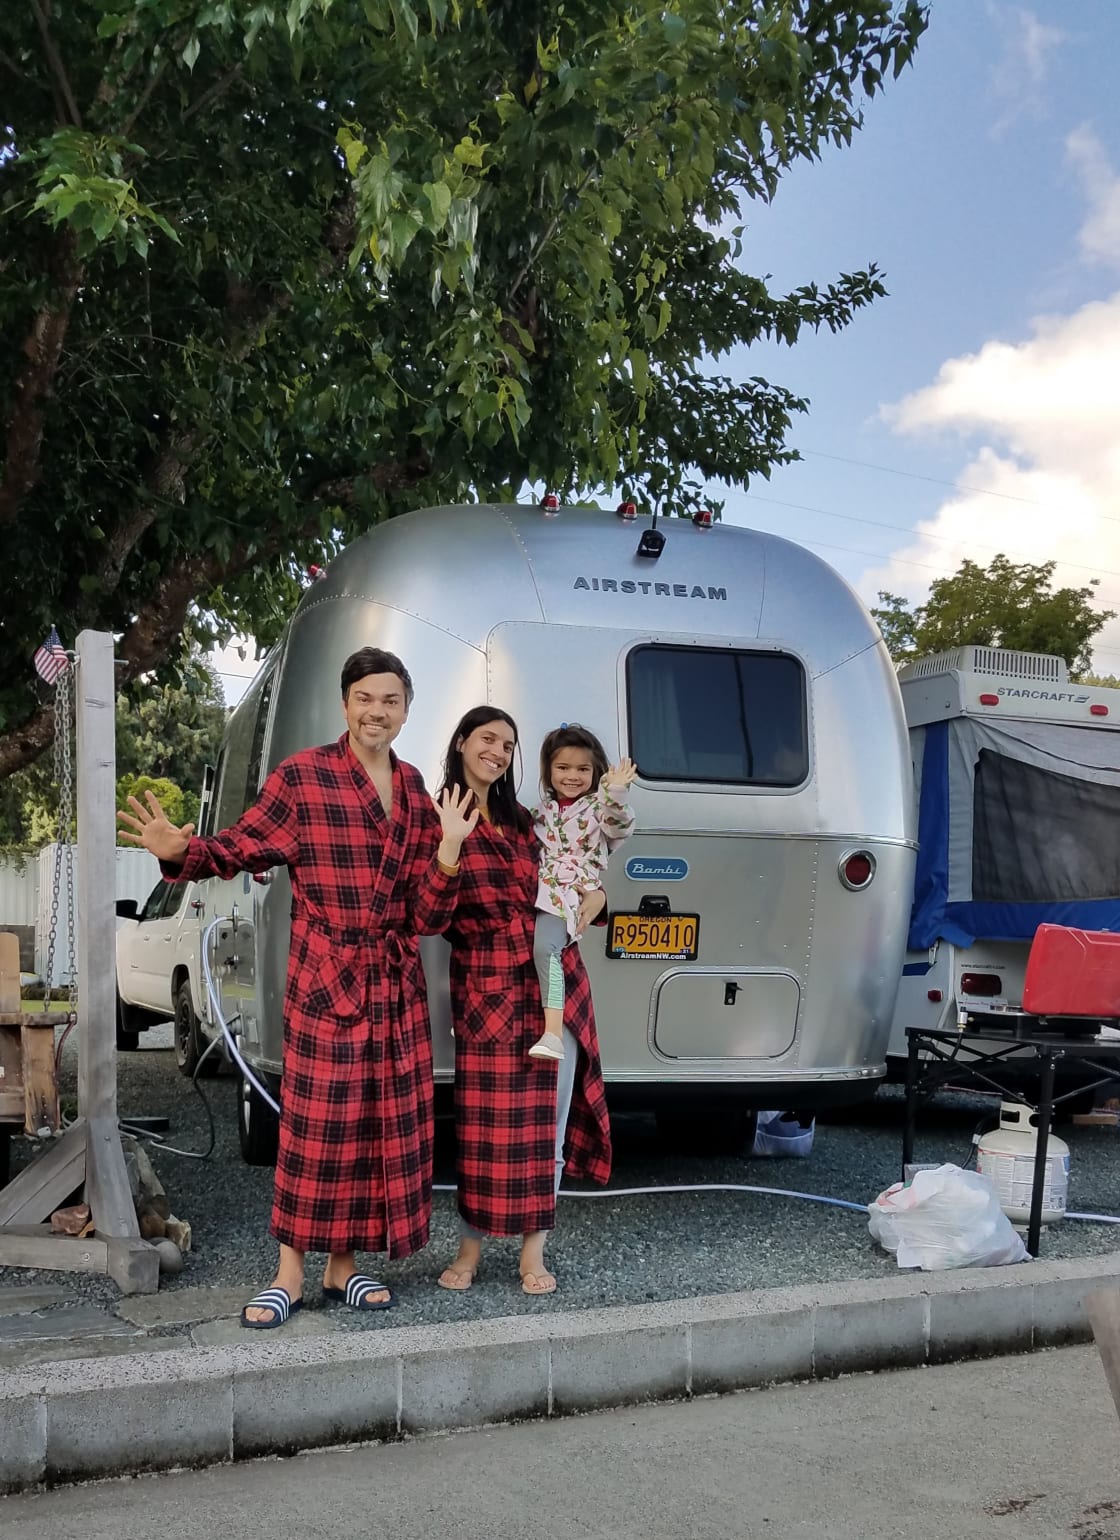 Luxury HipCampers